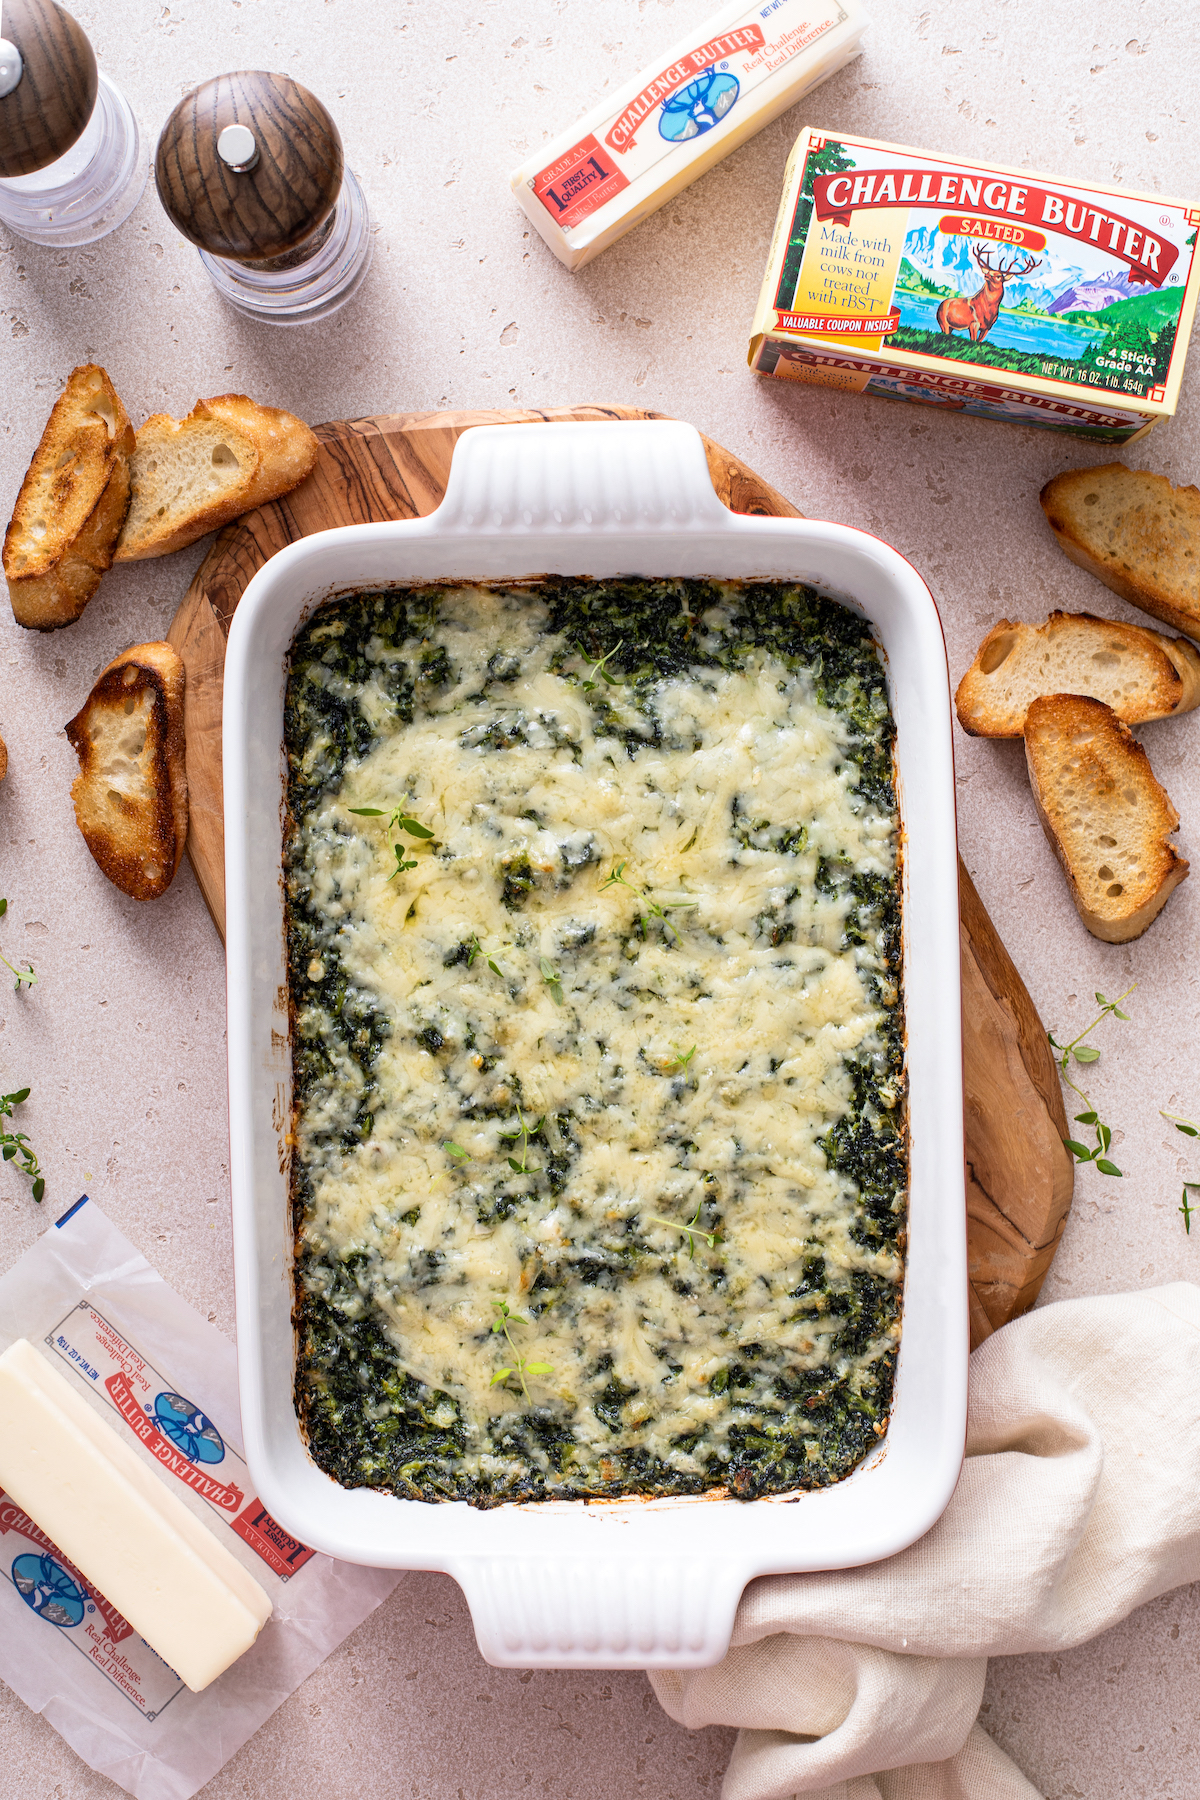 Spinach casserole in a baking dish with a tea towel and toasts.